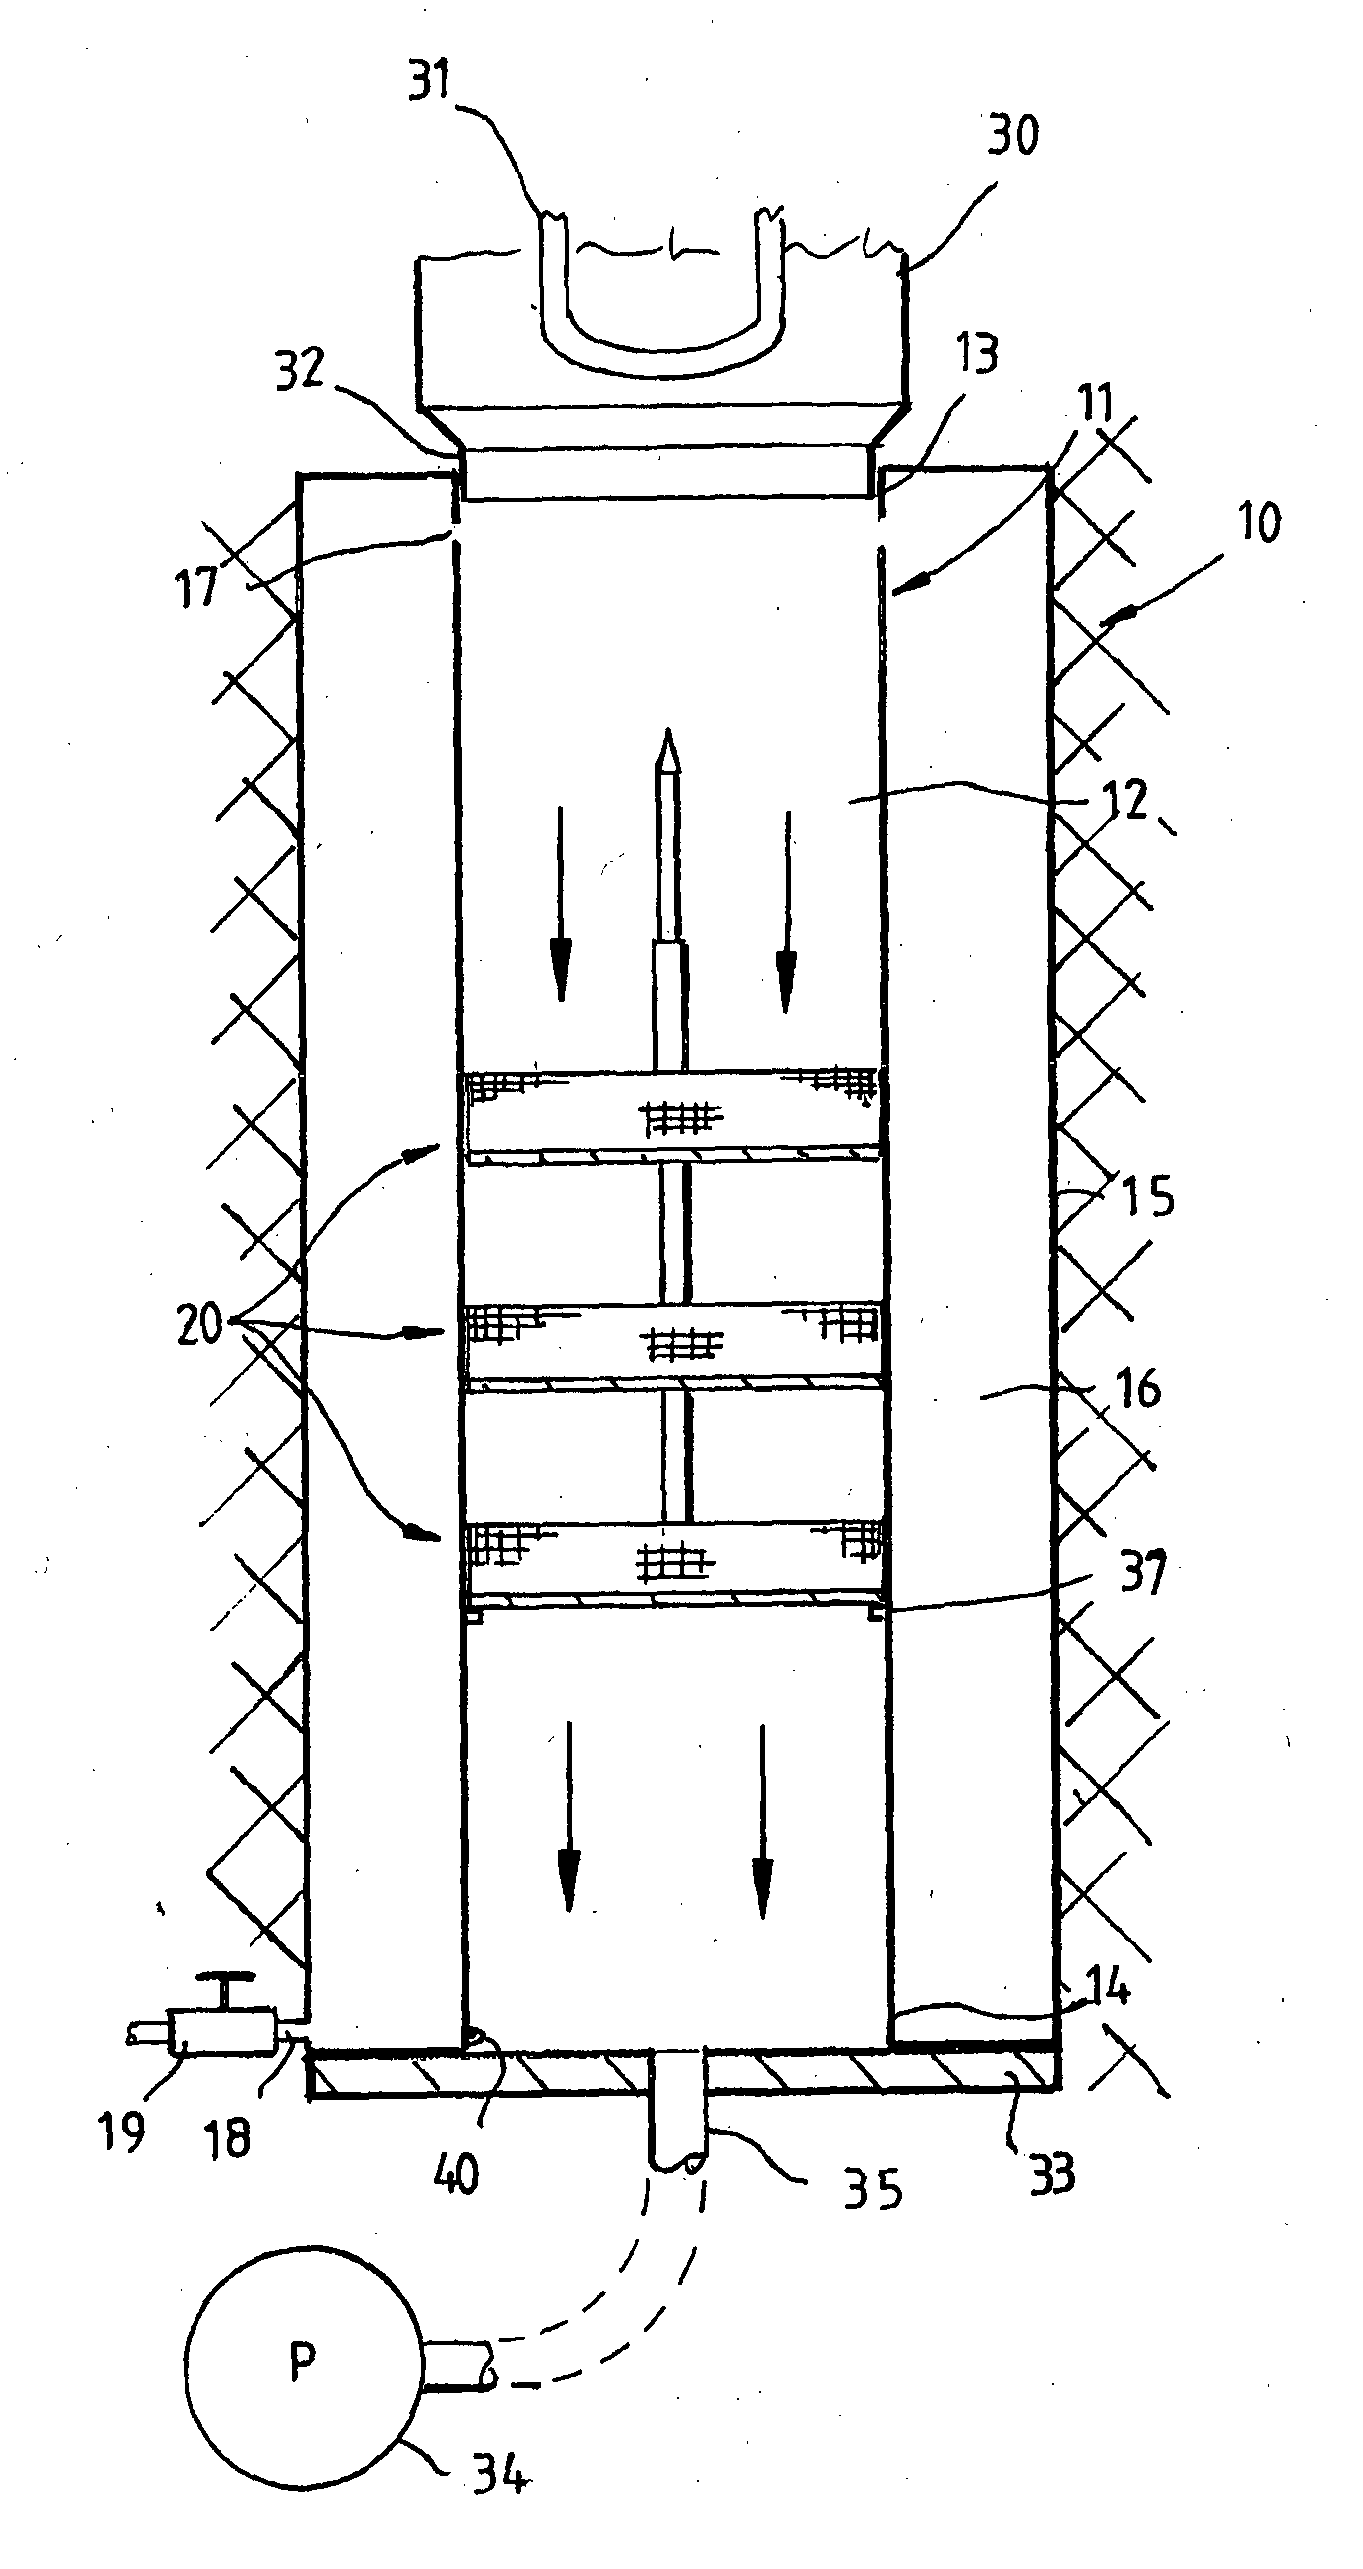 Method of and apparatus for determining the carbon content of soils